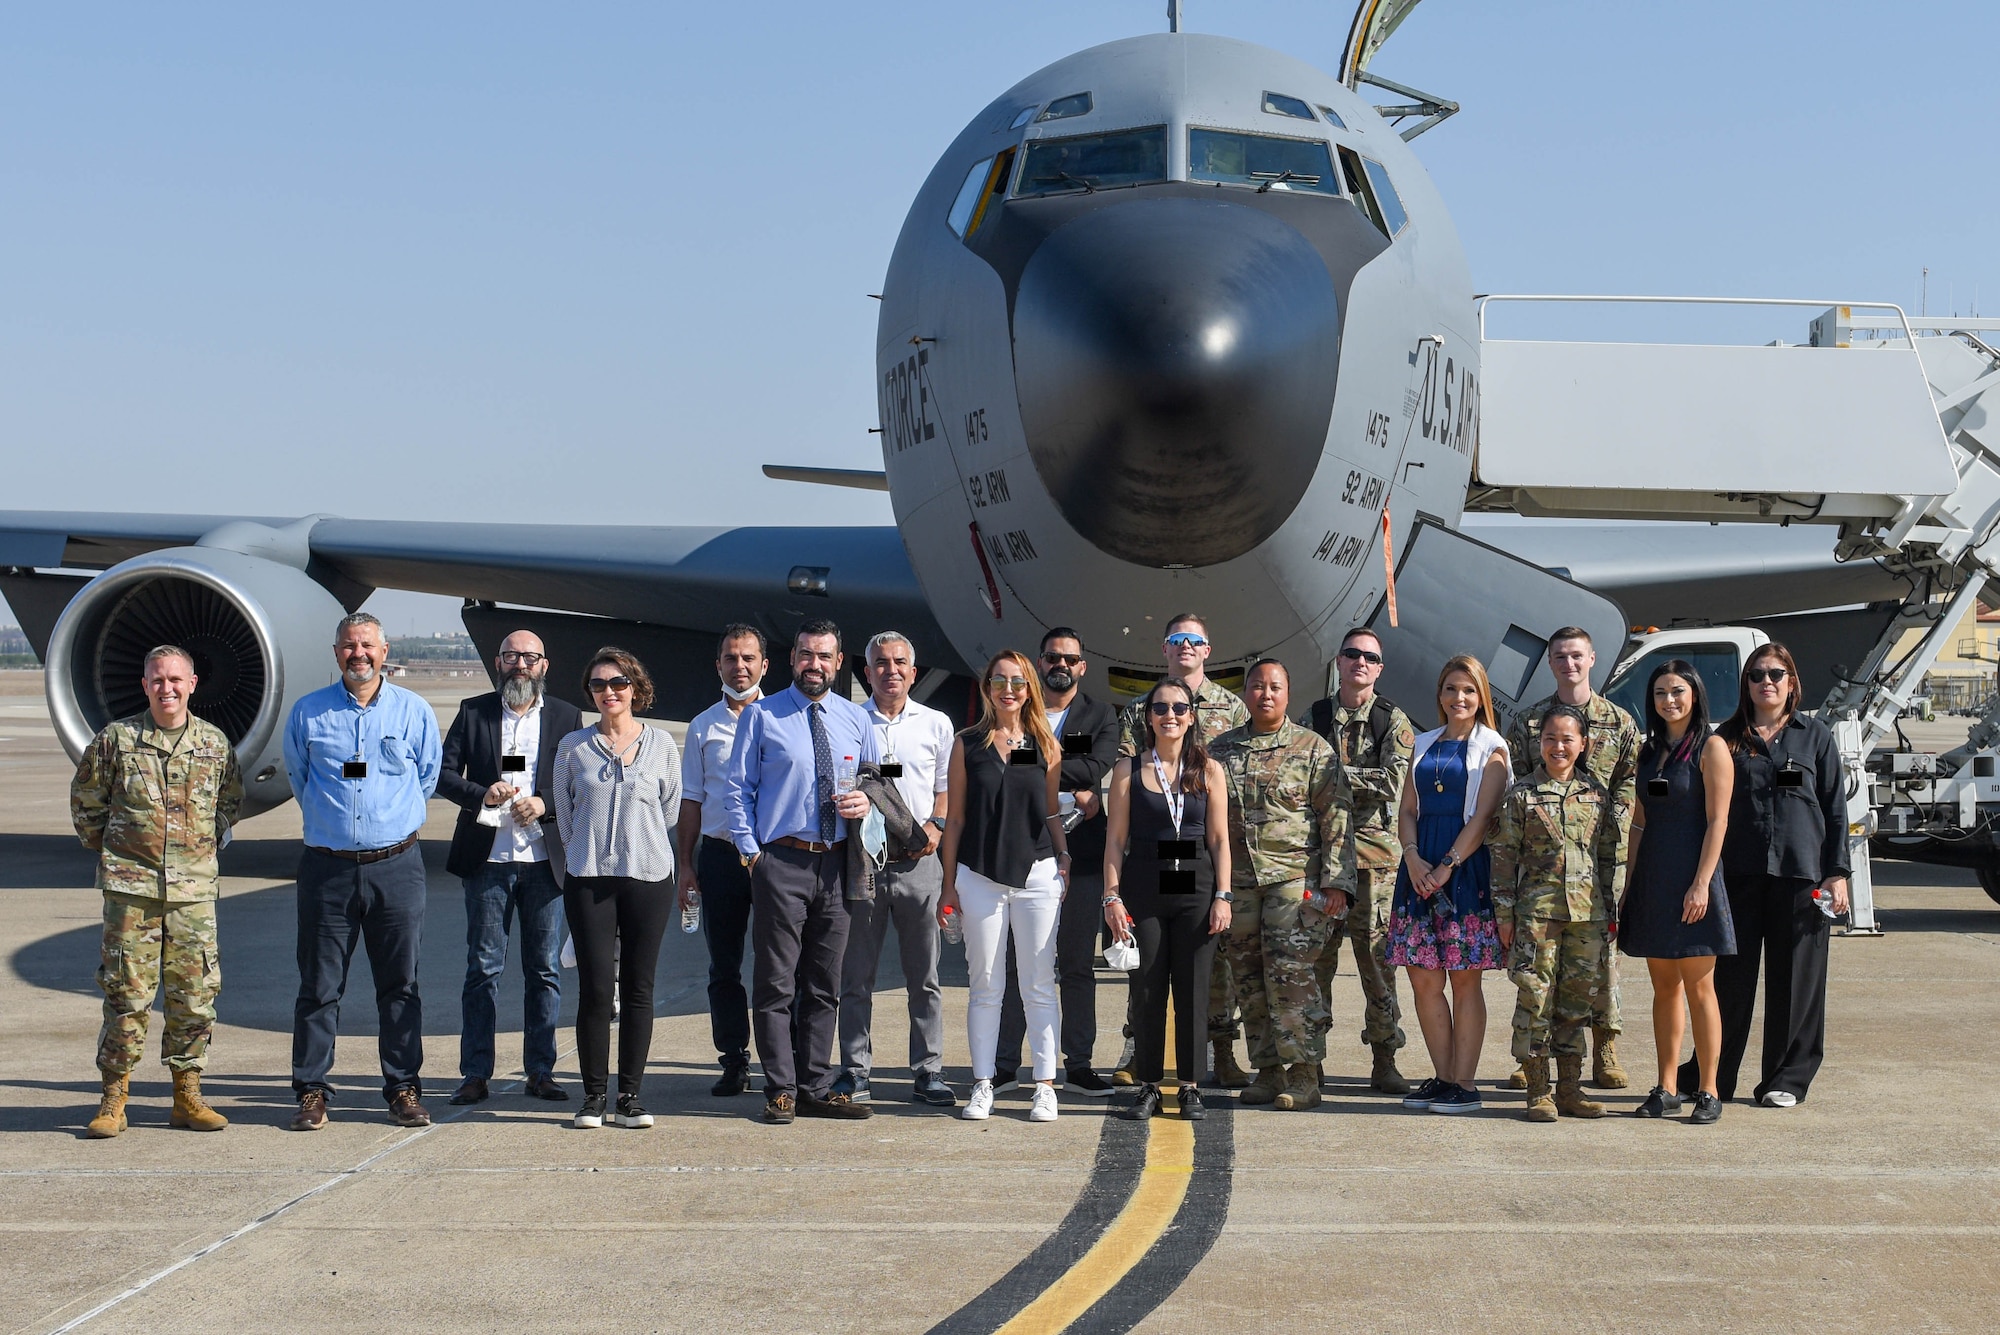 Group photo of U.S. Air Force Airmen and Turkish medical professionals from local hospitals